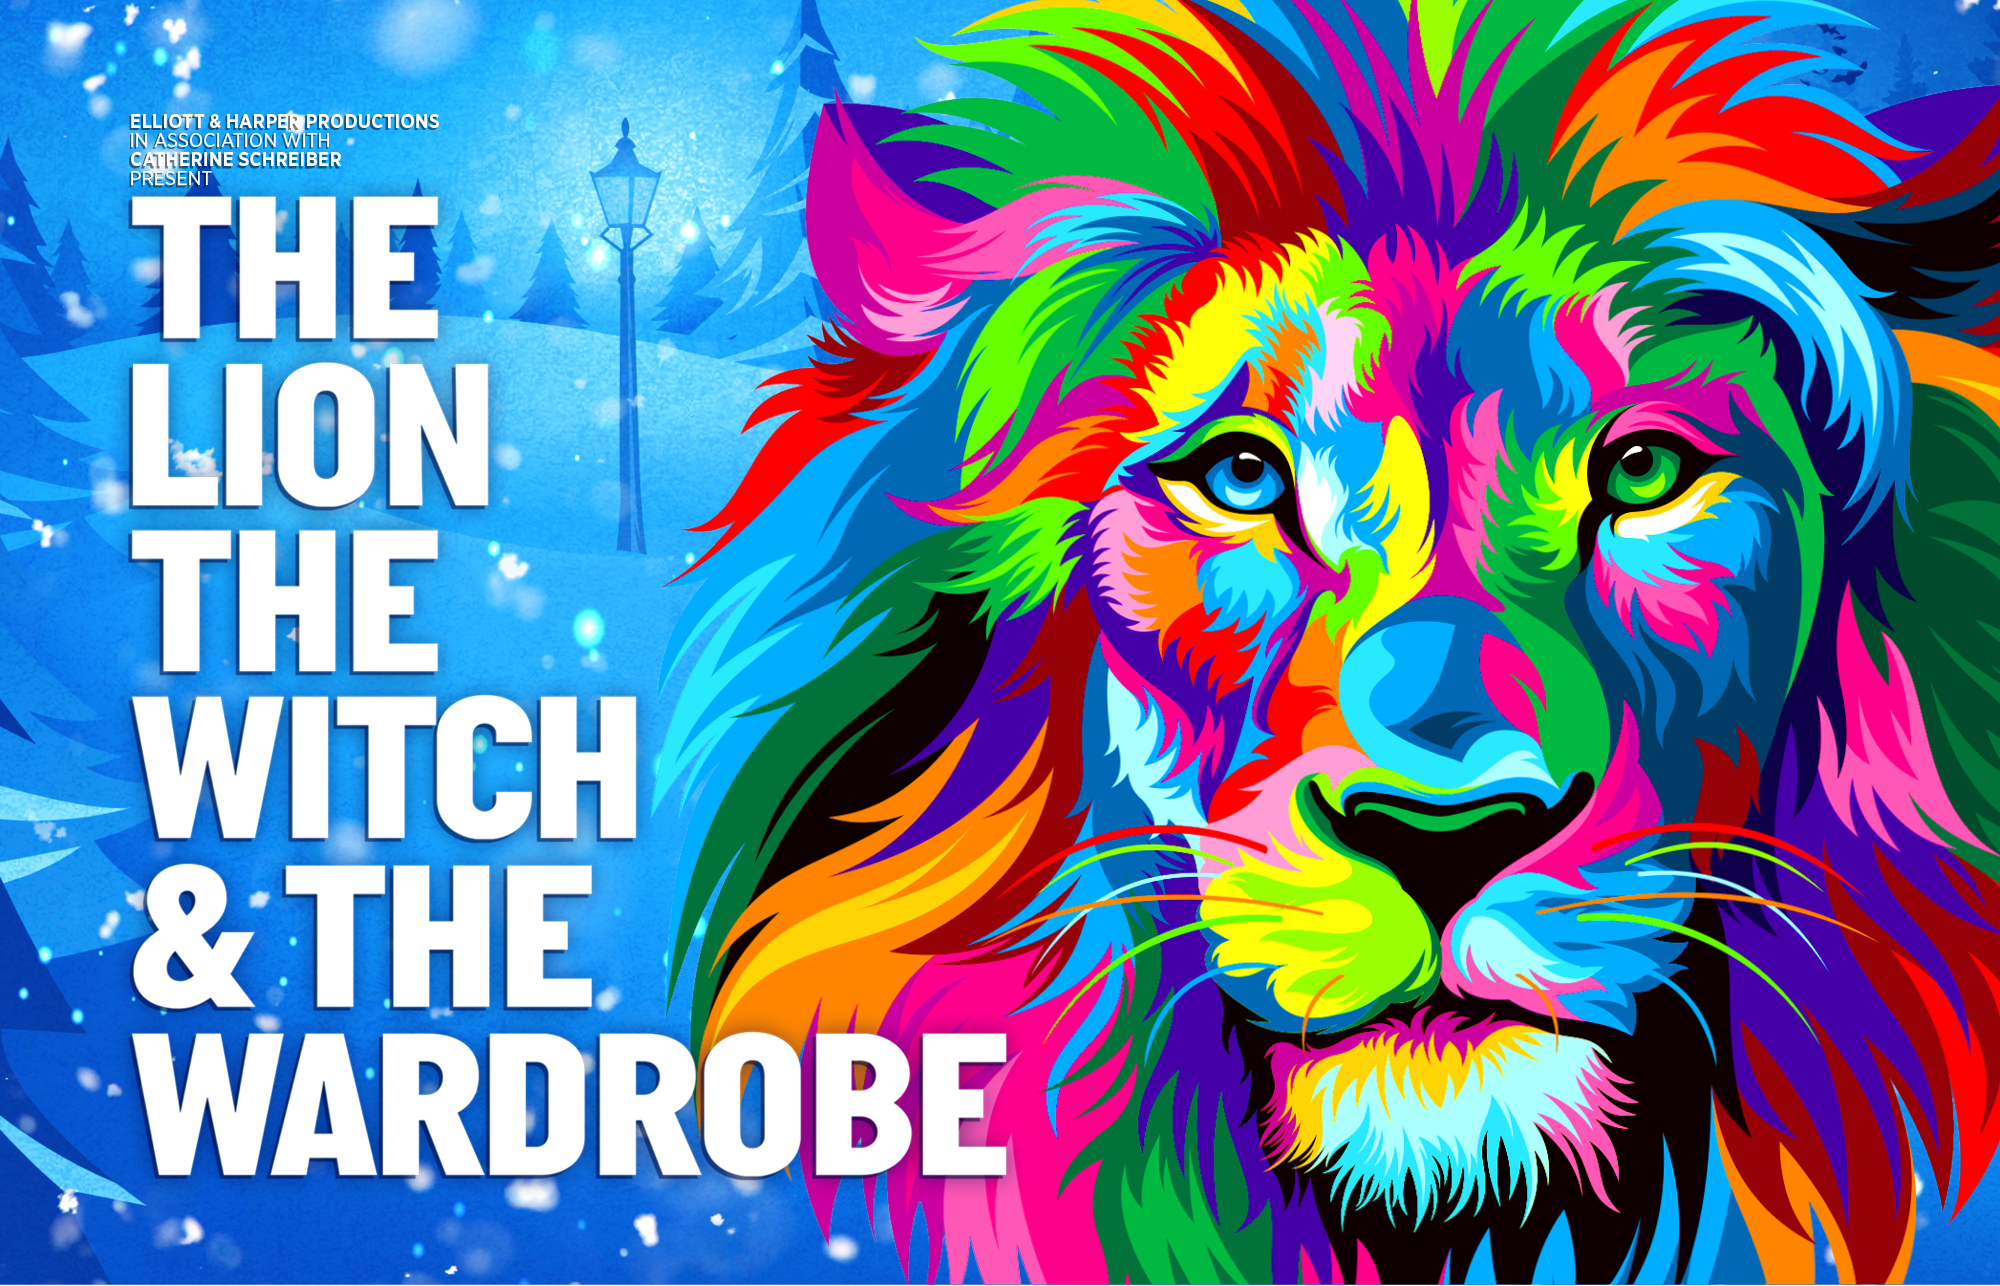 Promotional artwork for The Lion the Witch and the Wardrobe, featuring a colourful illustration of a lion's face against a wintery scene